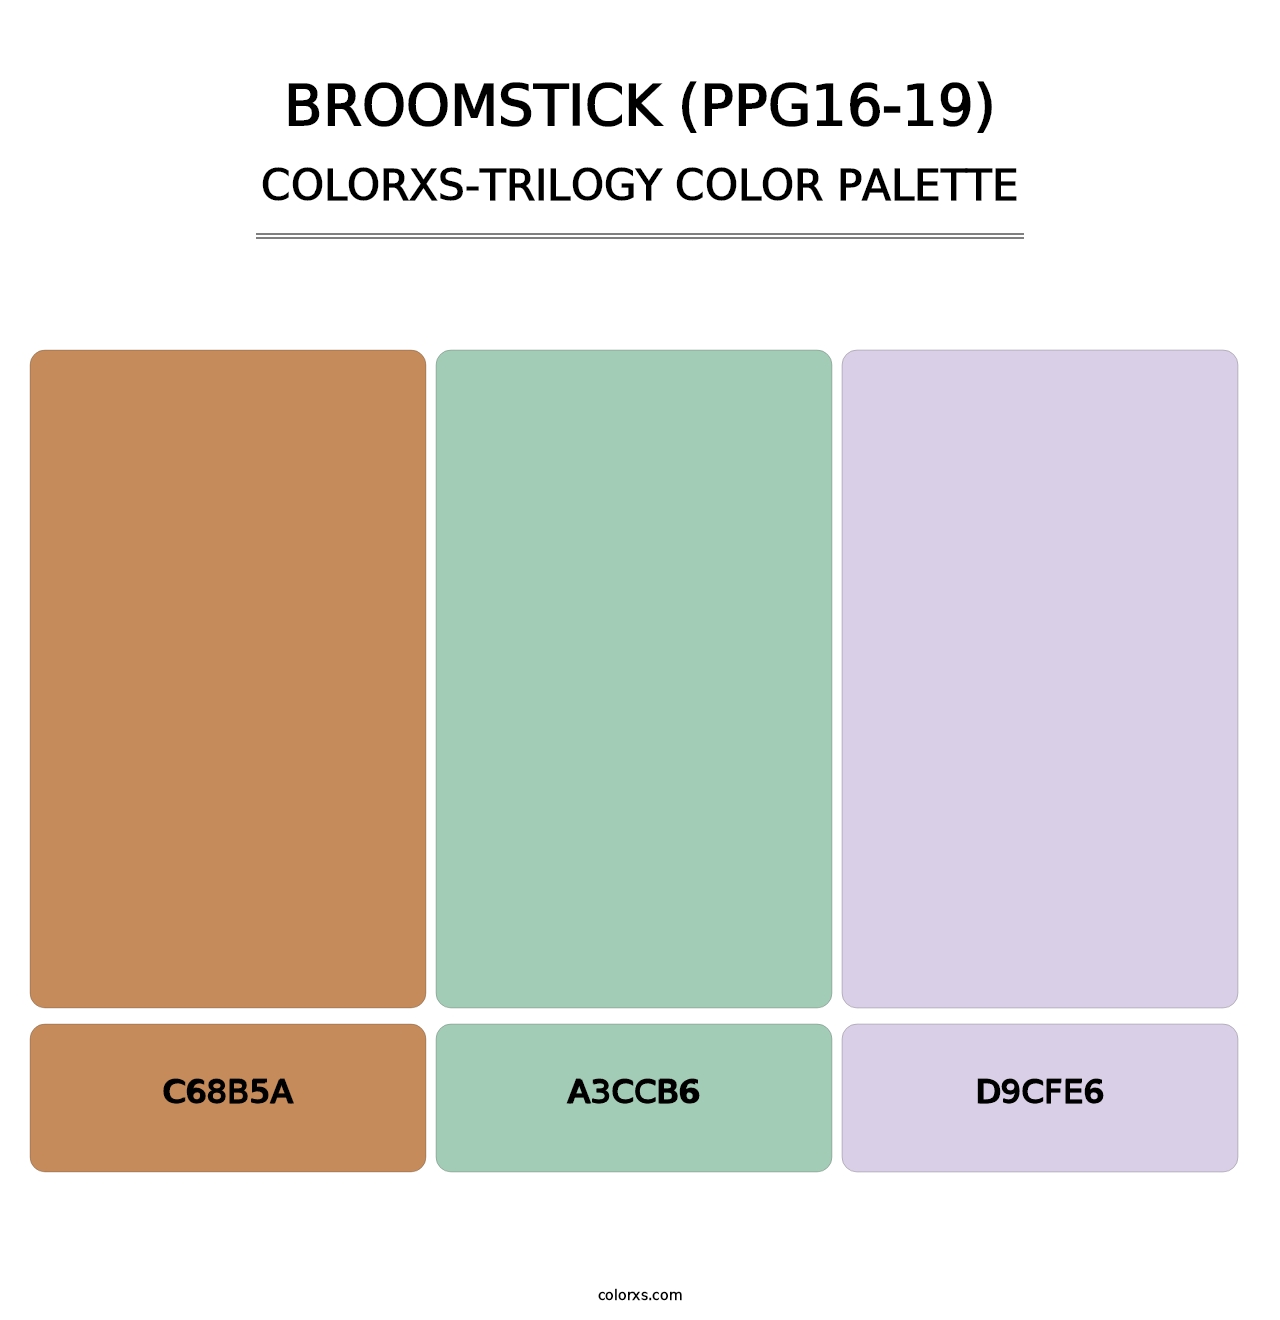 Broomstick (PPG16-19) - Colorxs Trilogy Palette